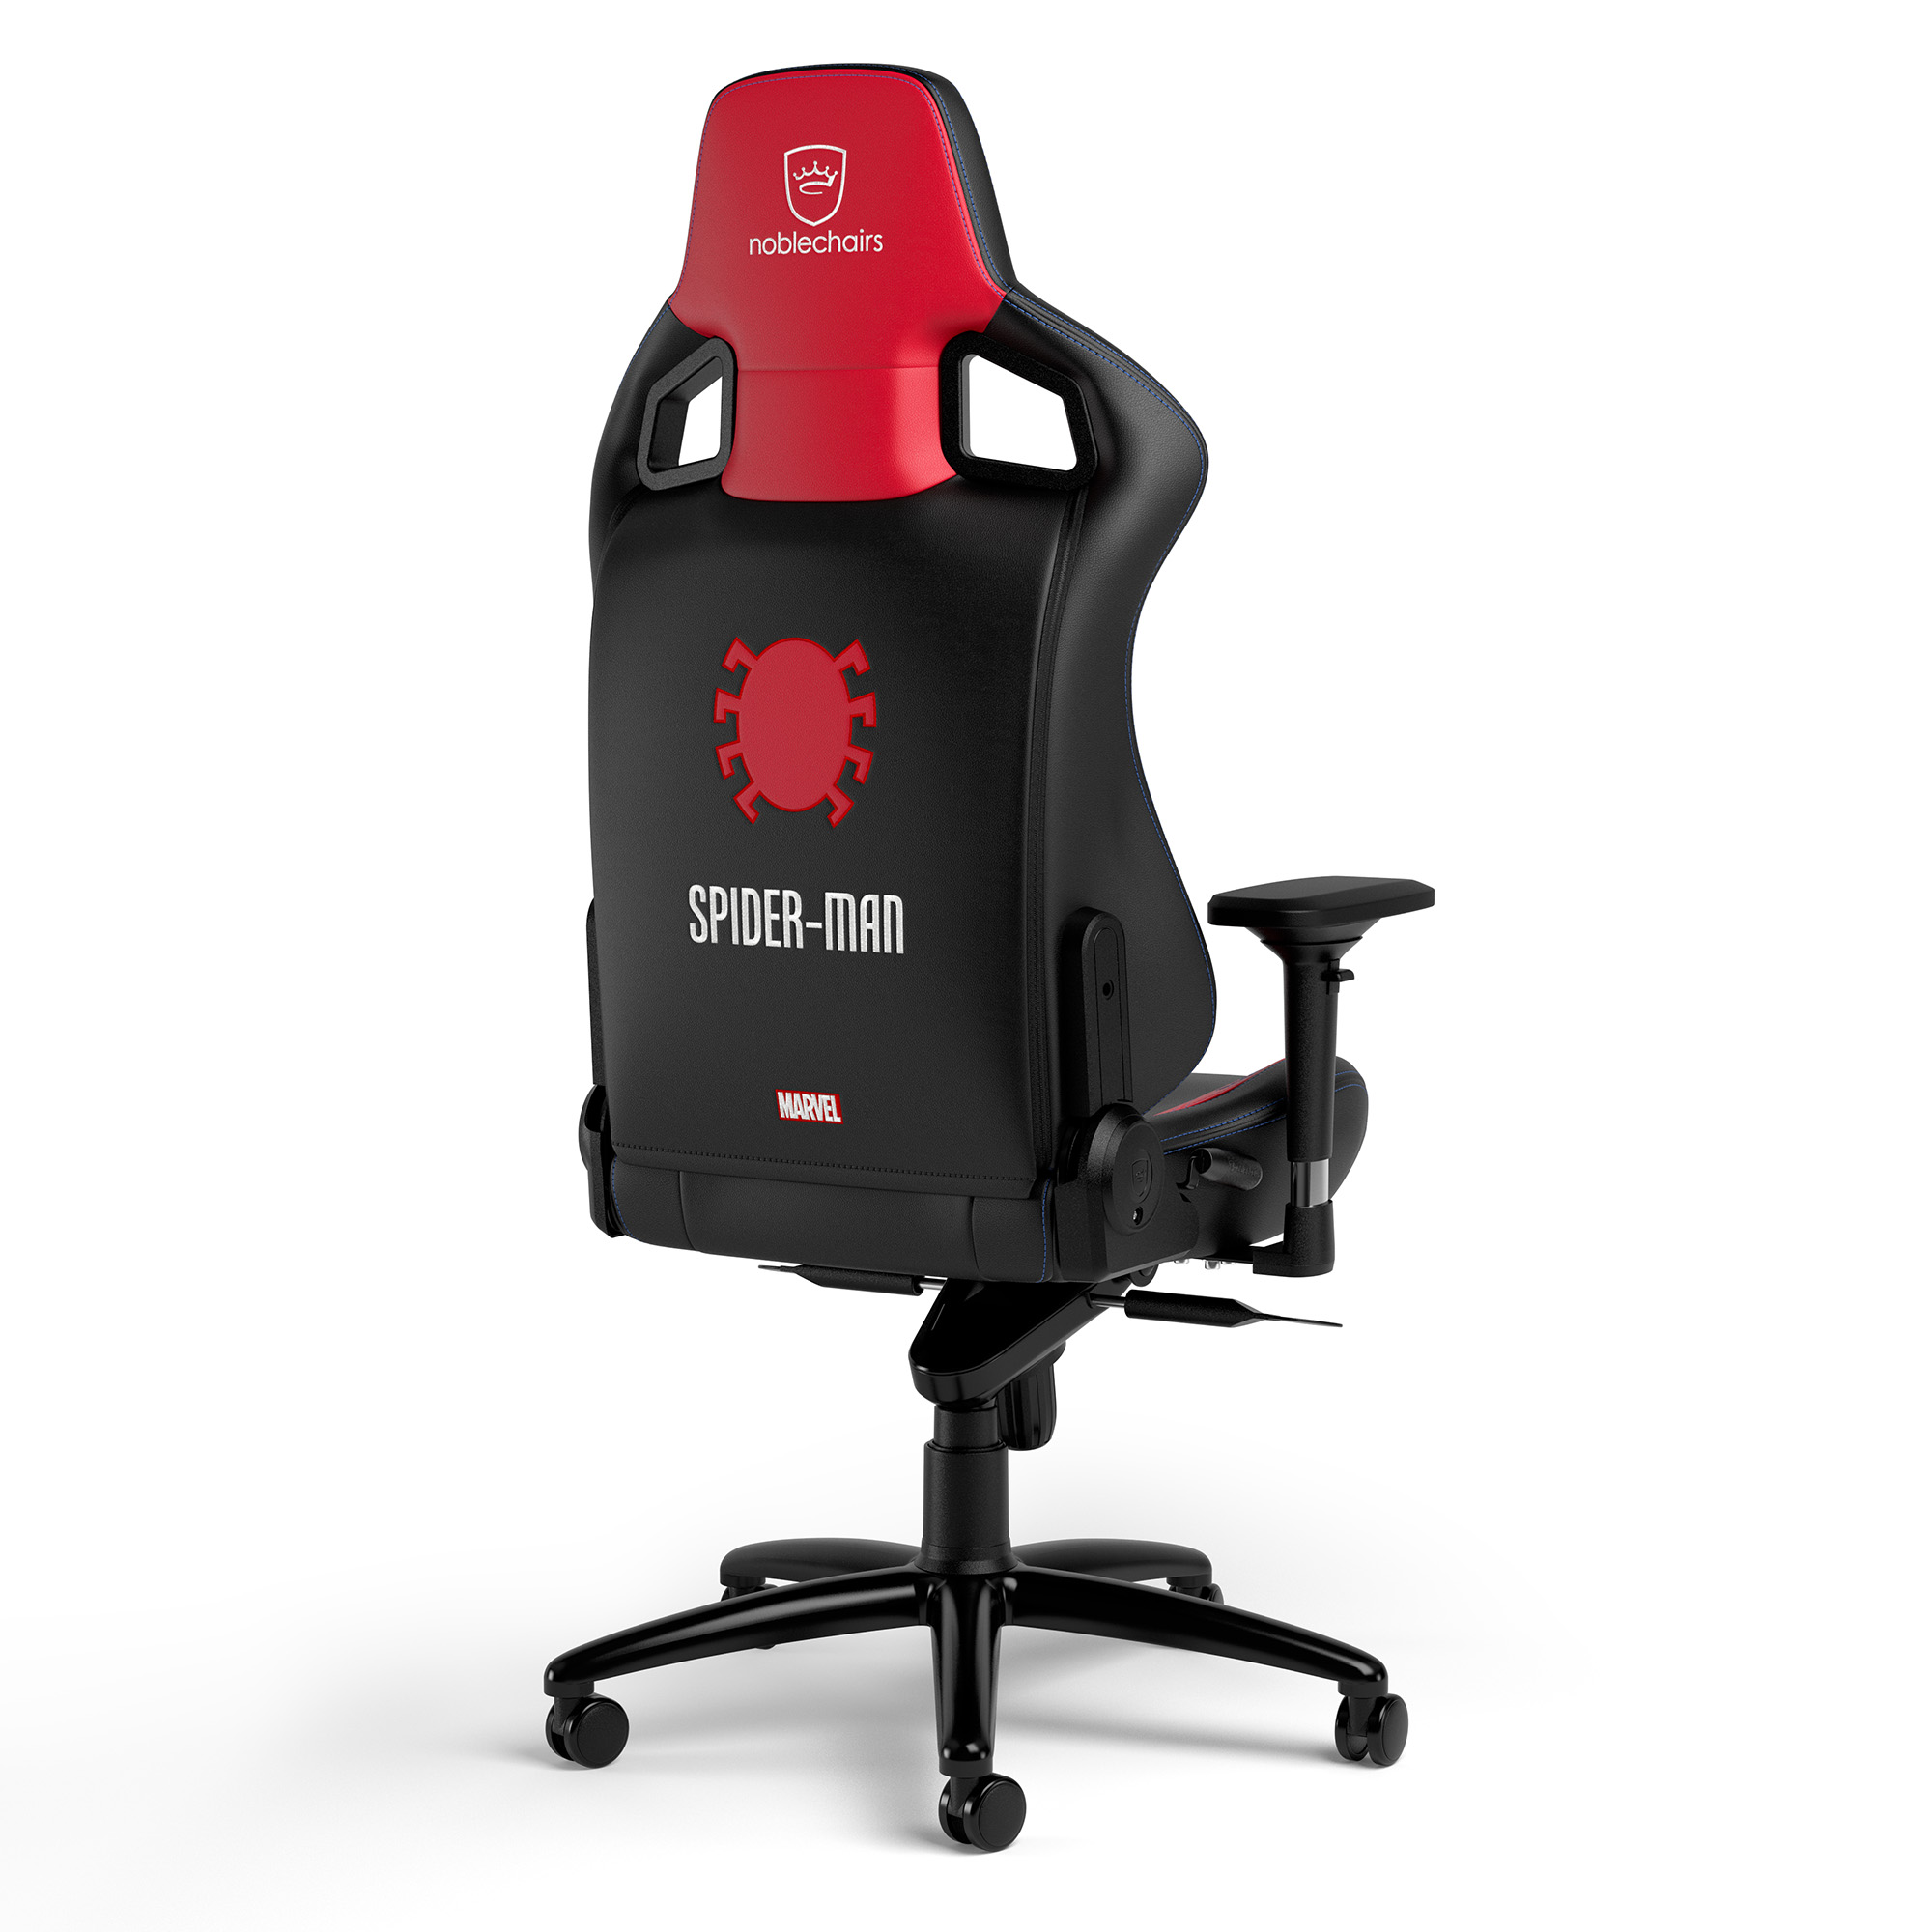 noblechairs EPIC - Spider-Man Edition